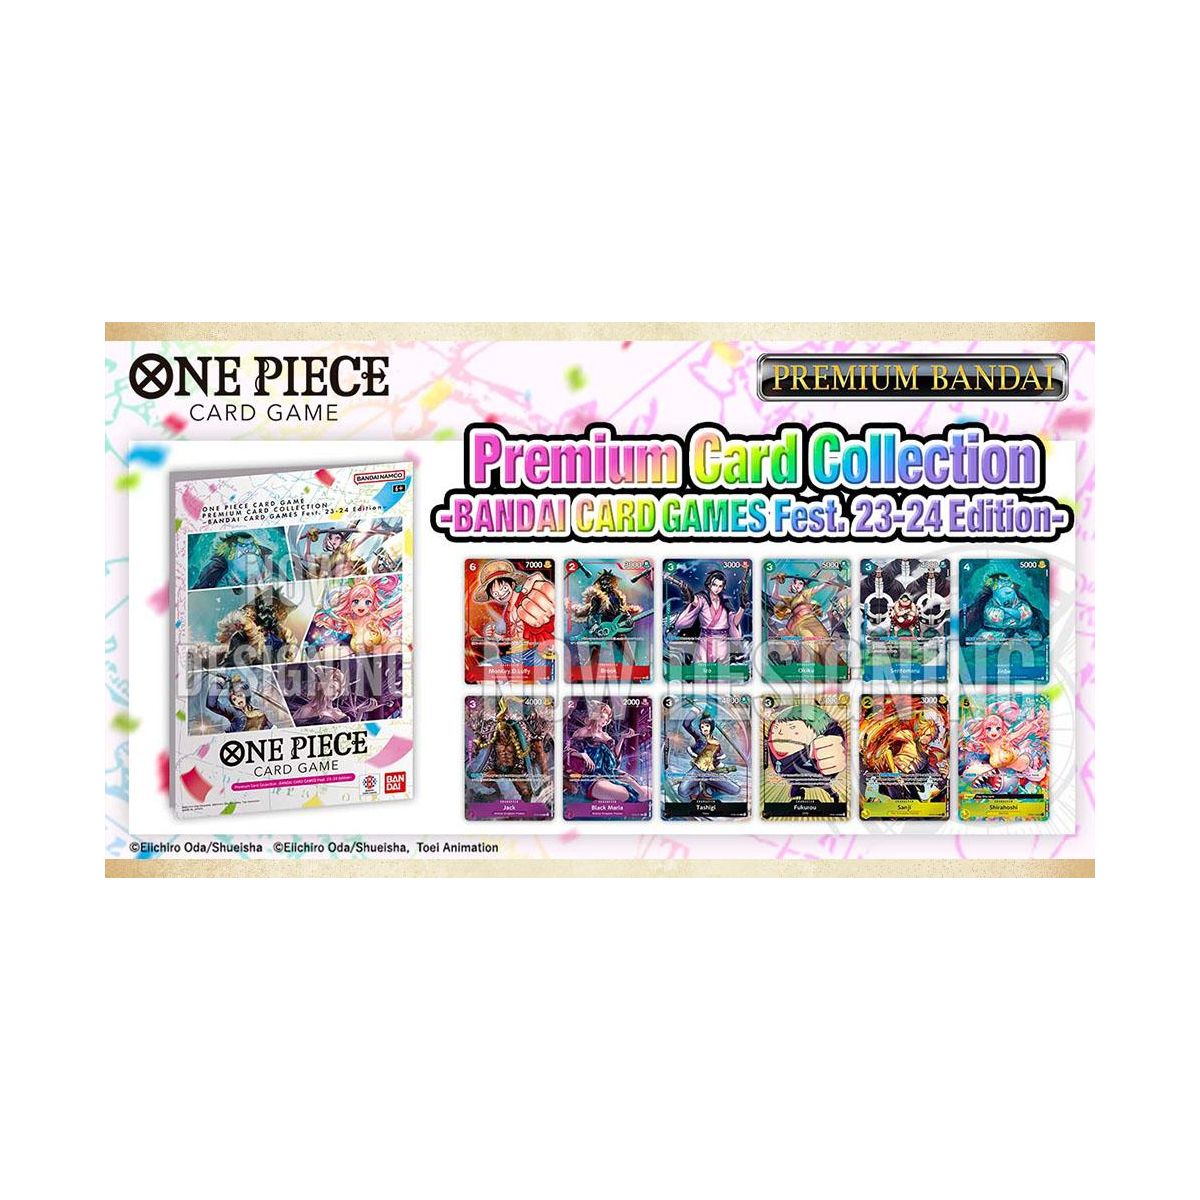 Item One Piece Card Game - Premium Card Collection - BANDAI CARD GAMES Fest. 23-24 Edition - English